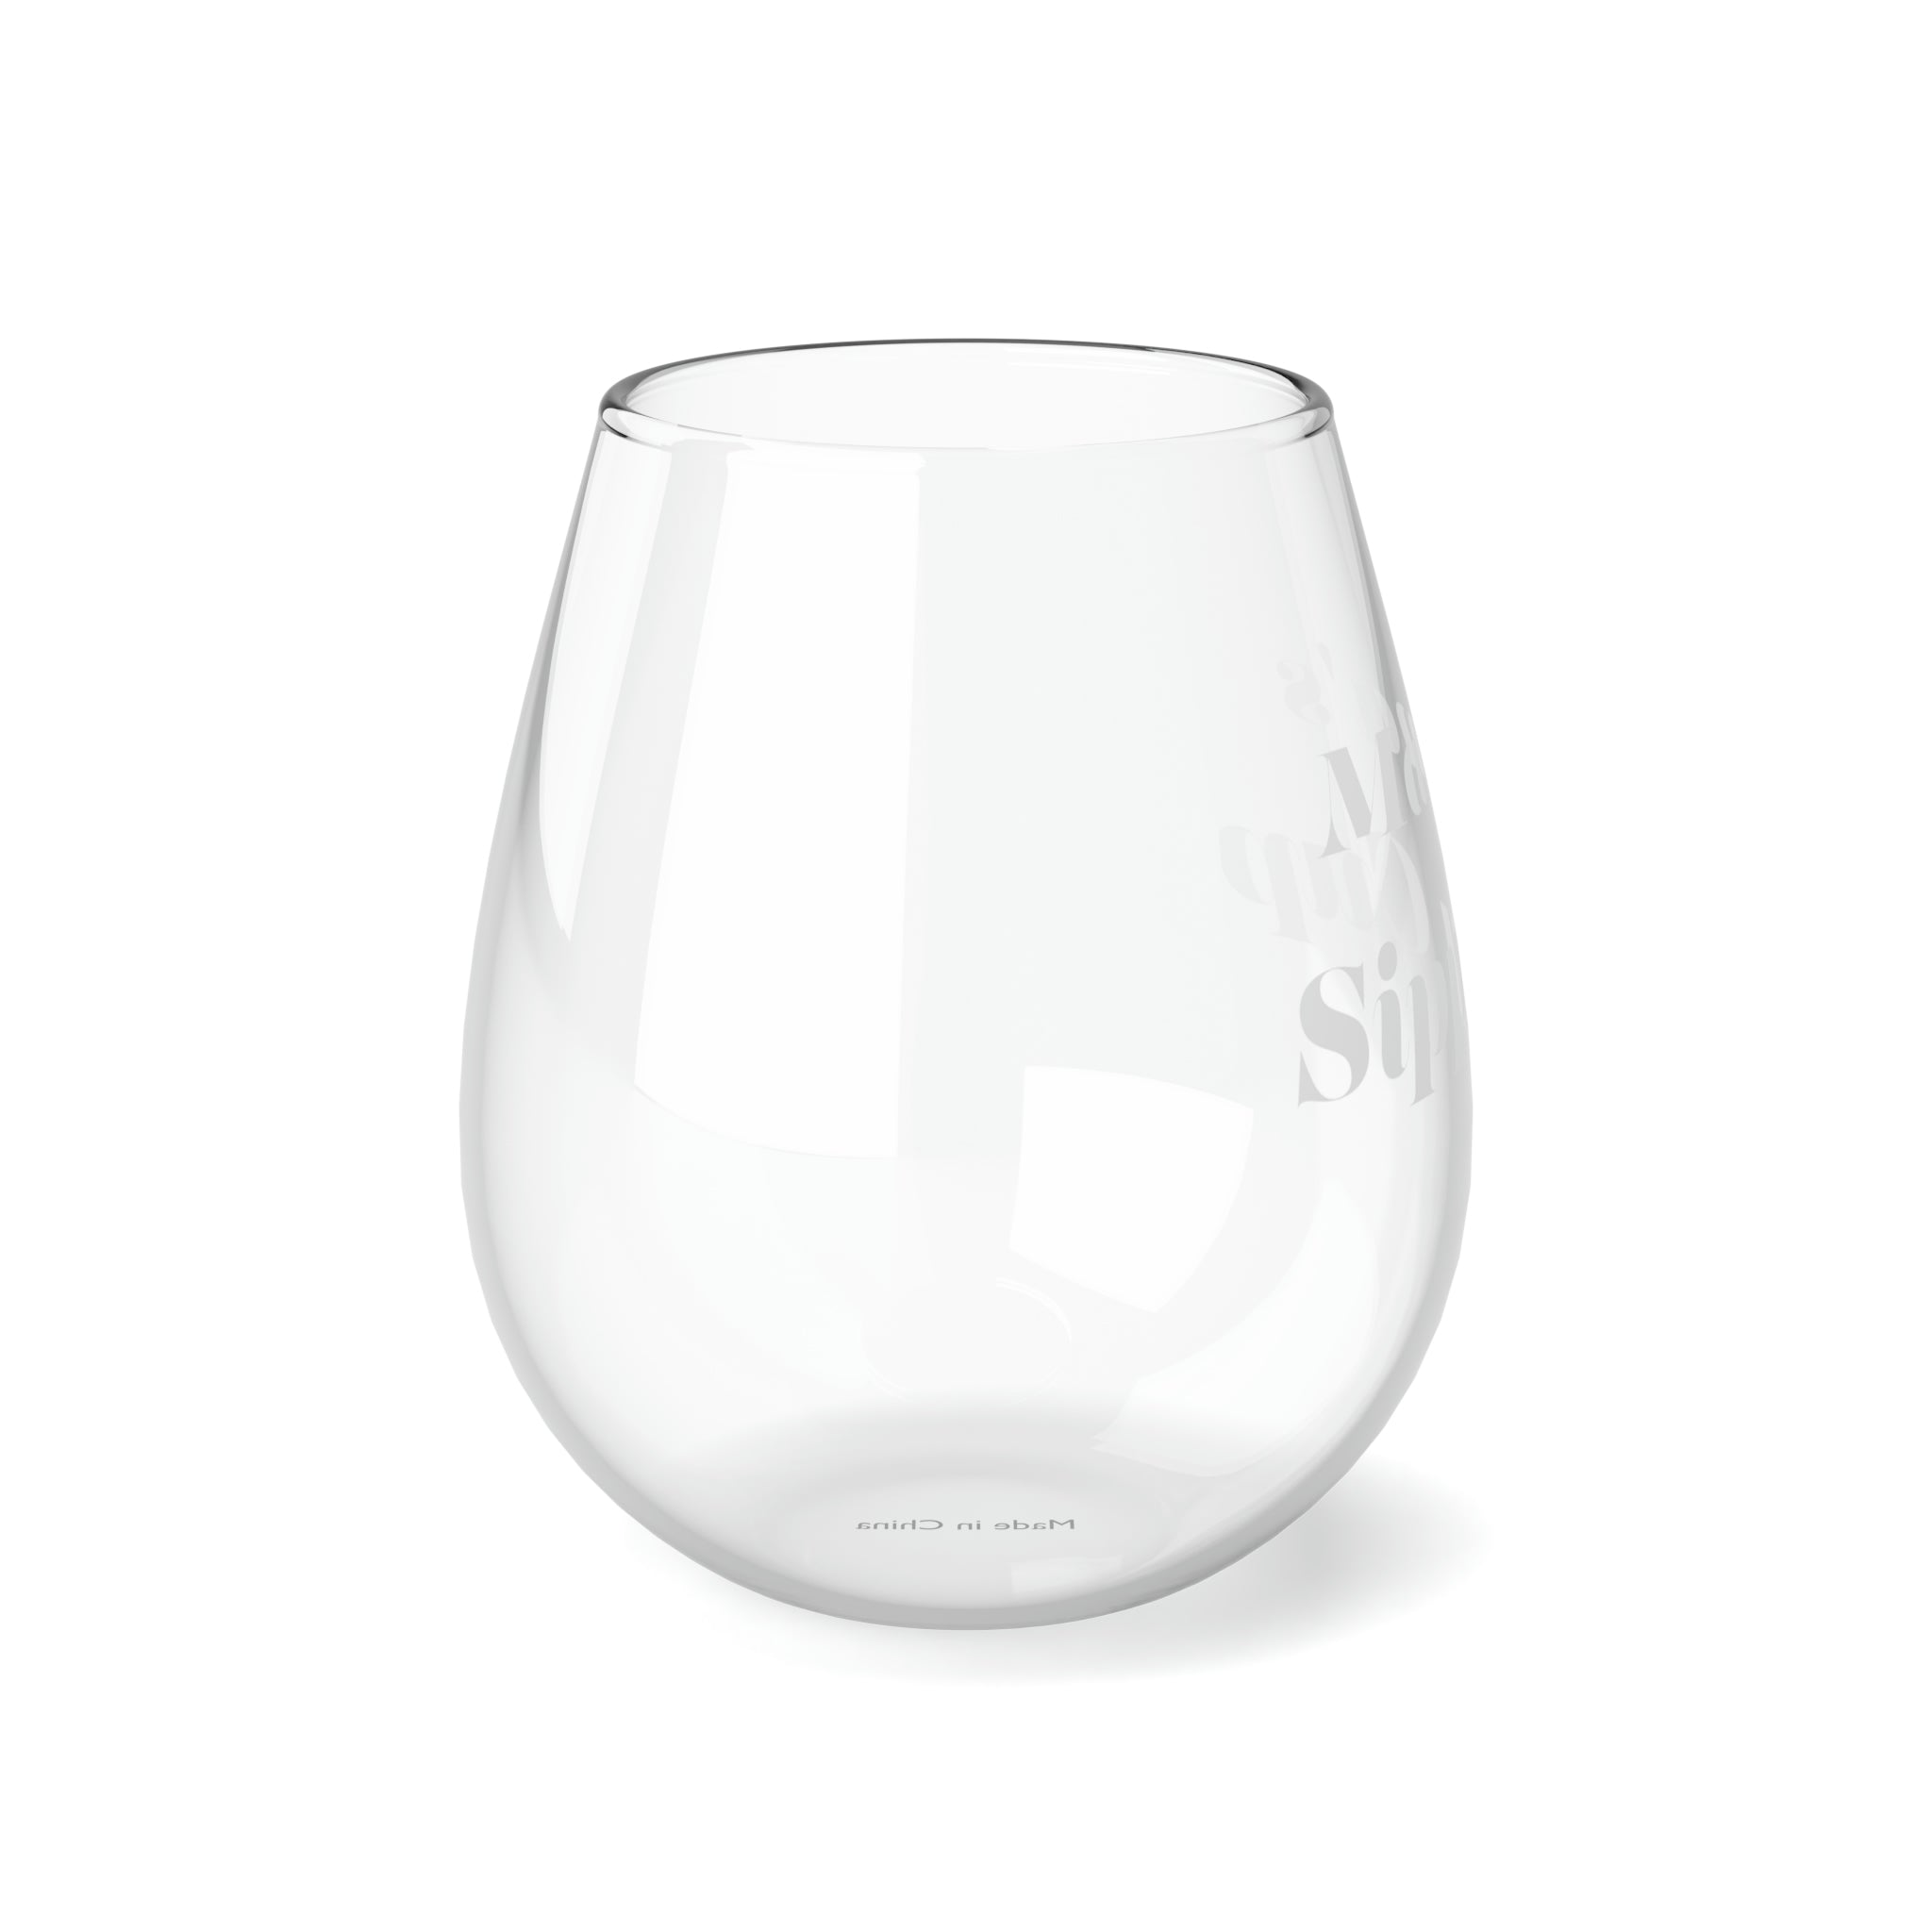 Stemless Wine Glass, 11.75oz - Mama's Sippy Cup